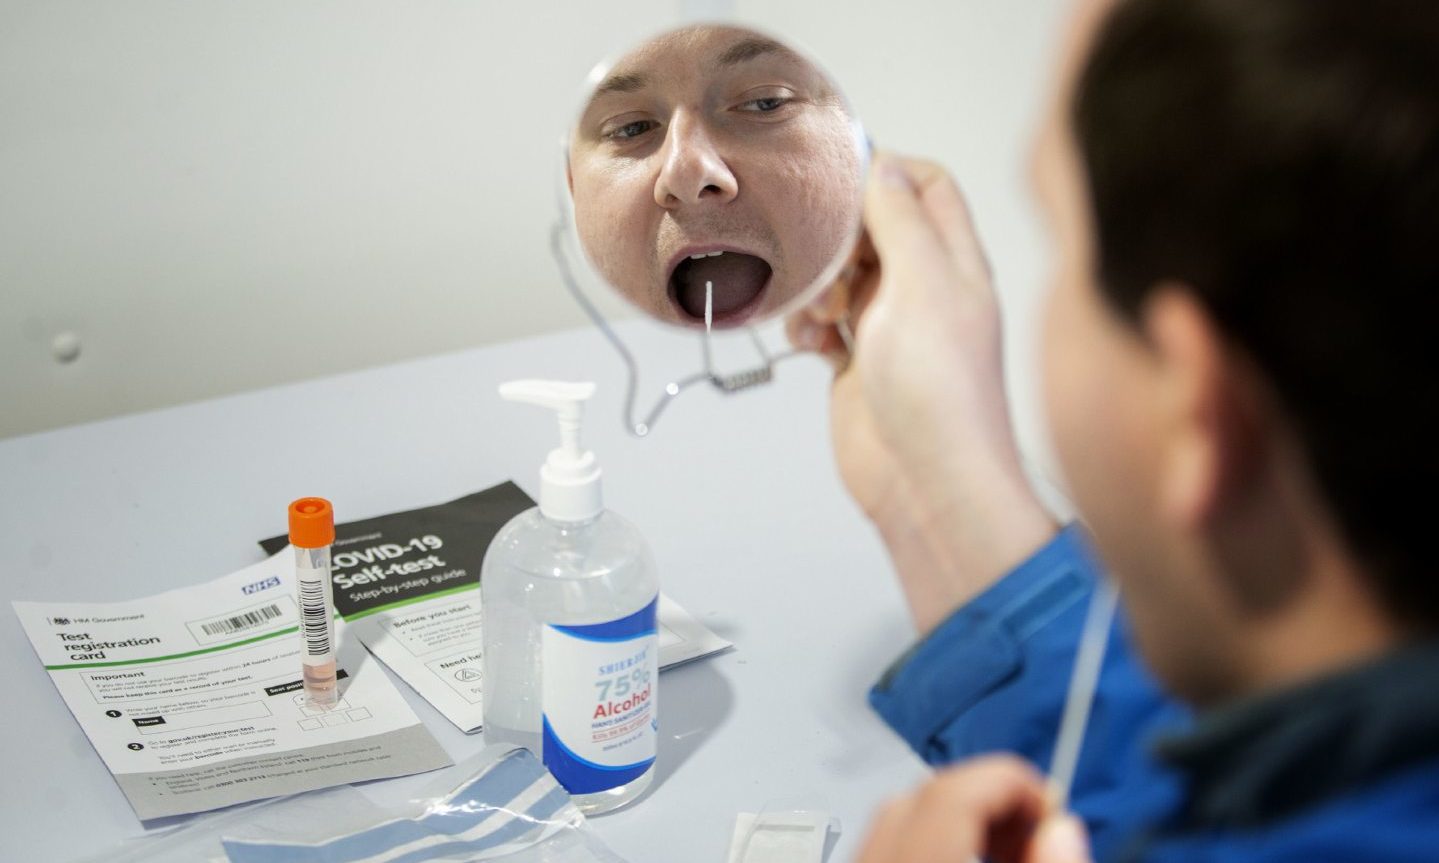 A man self-administering a rapid covid test in the mirror